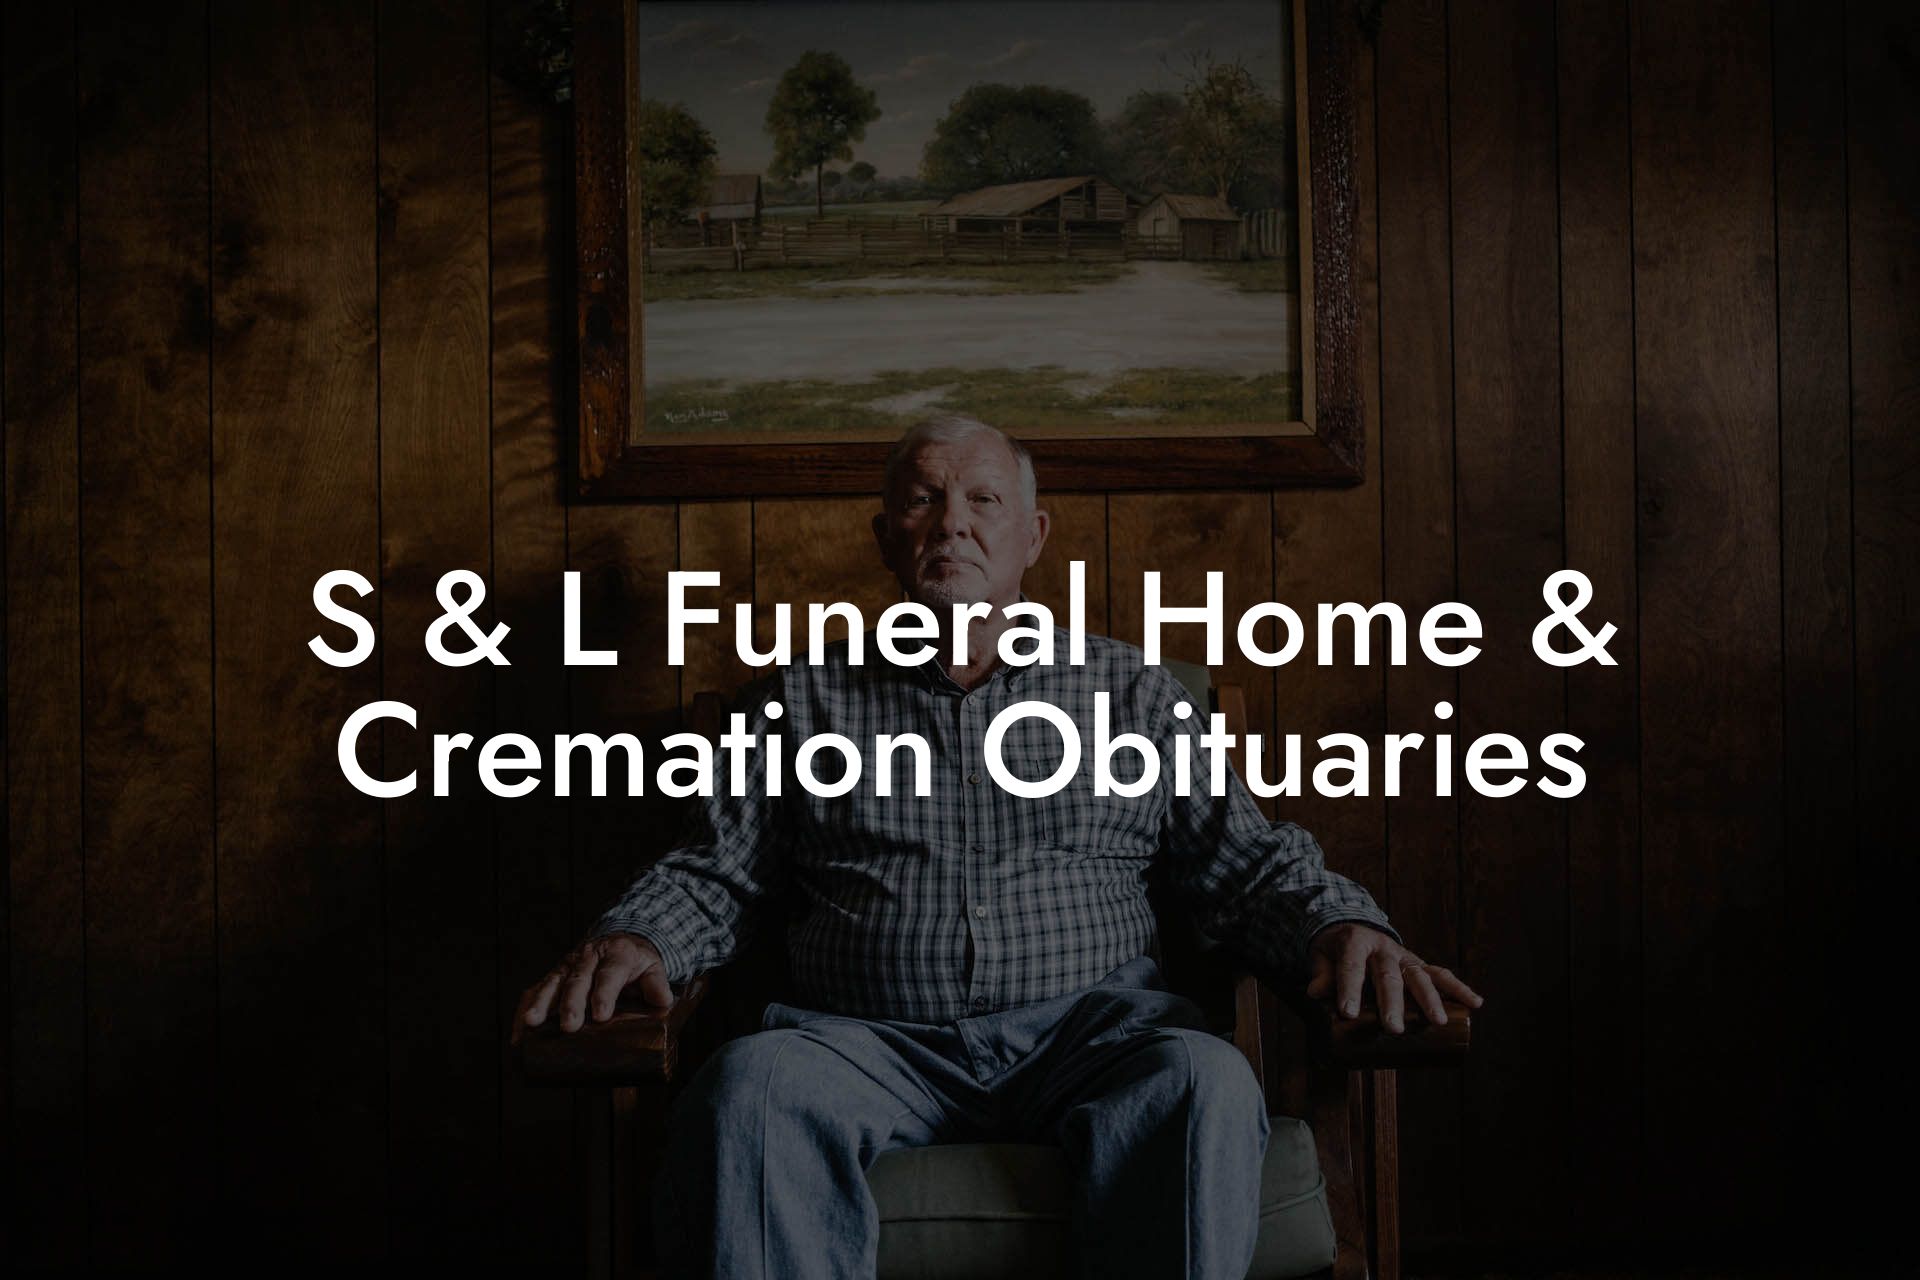 S & L Funeral Home & Cremation Obituaries